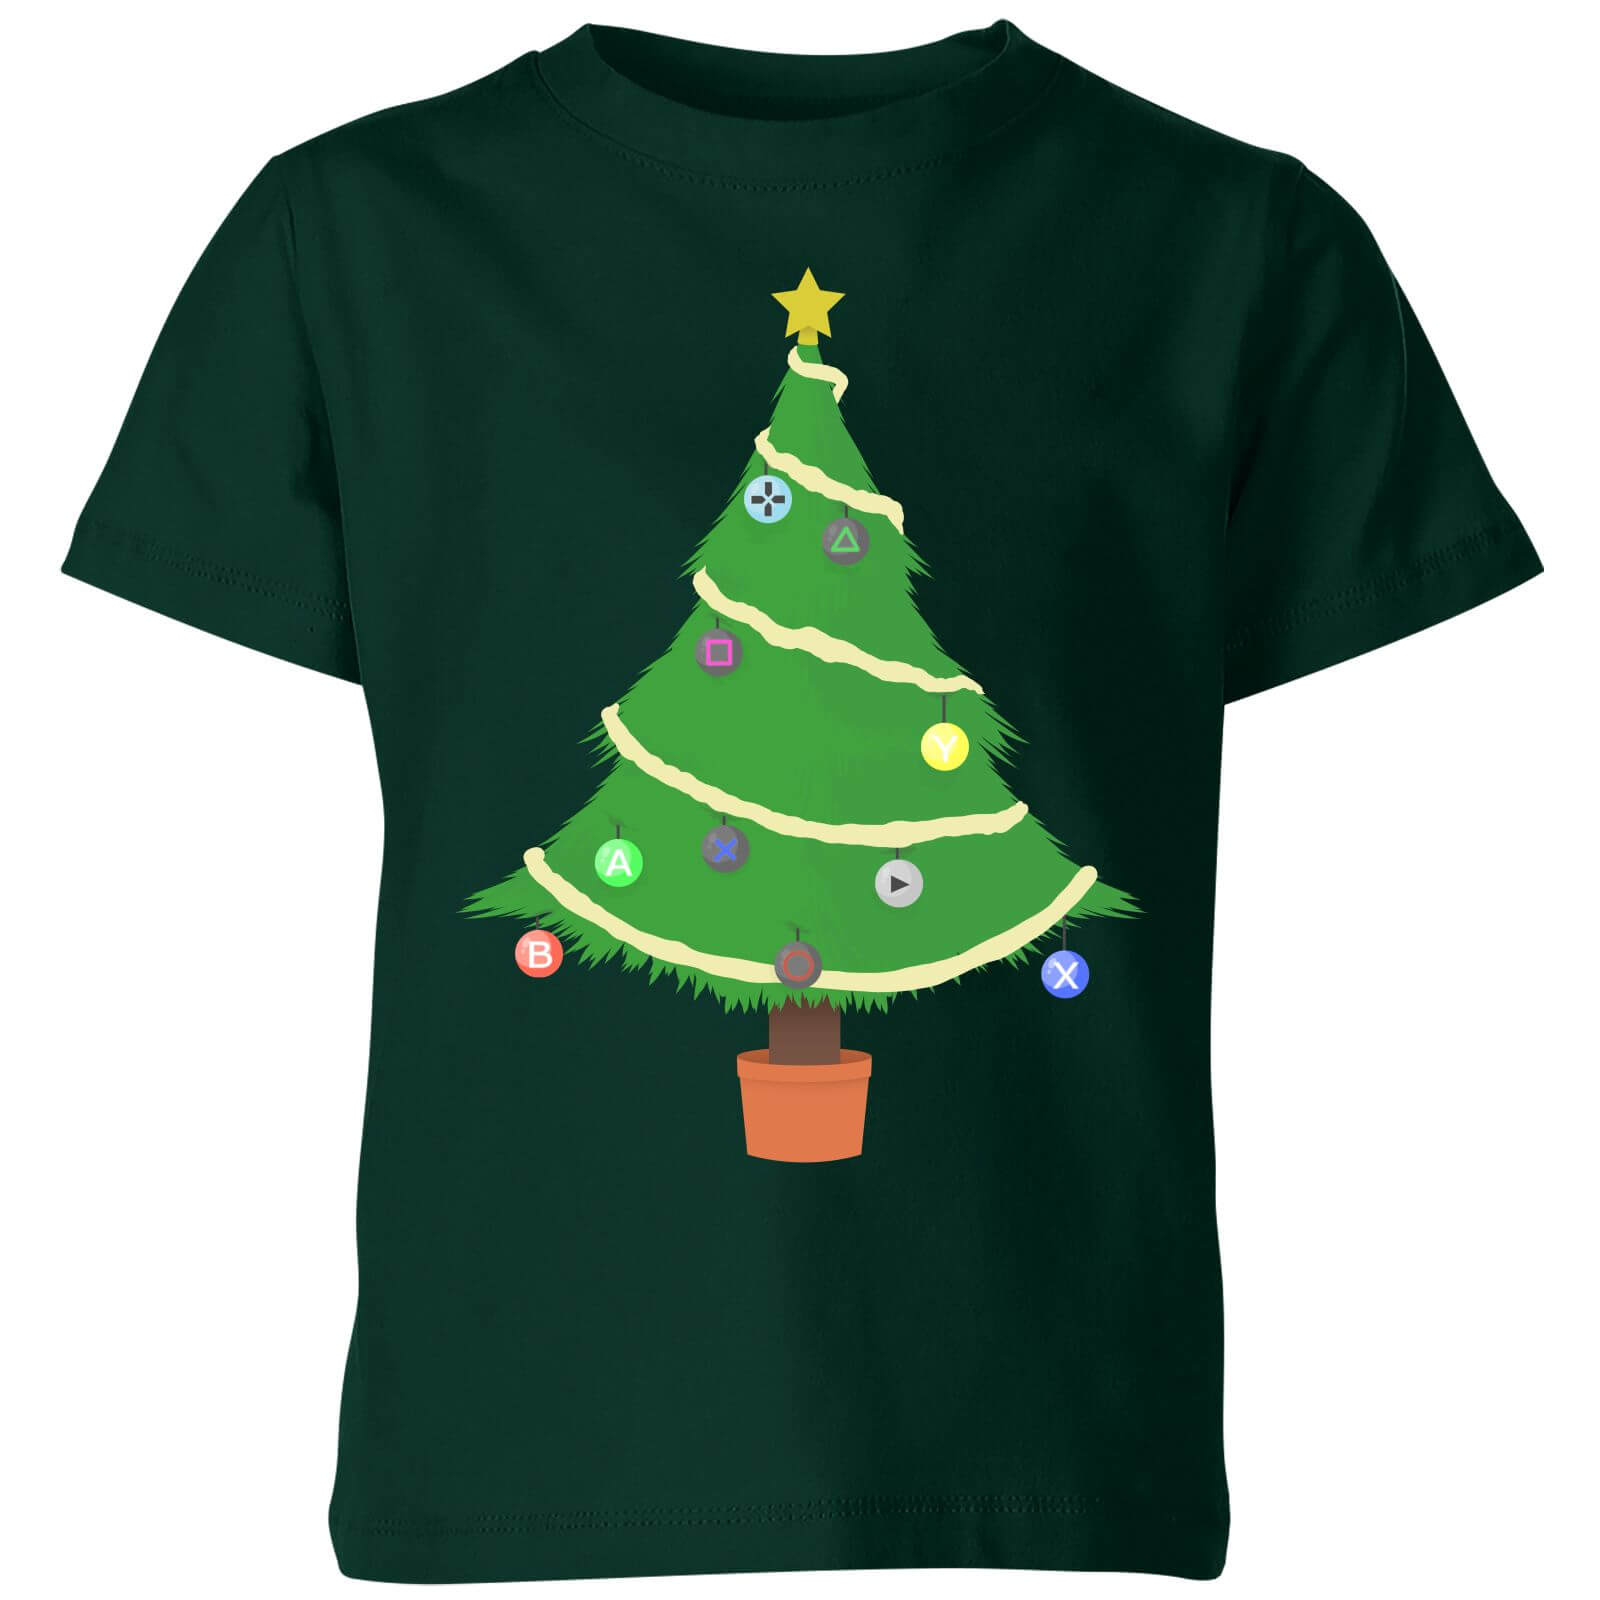 Buttons Tree Kids' T-Shirt - Forest Green - 5-6 Years - Forest Green